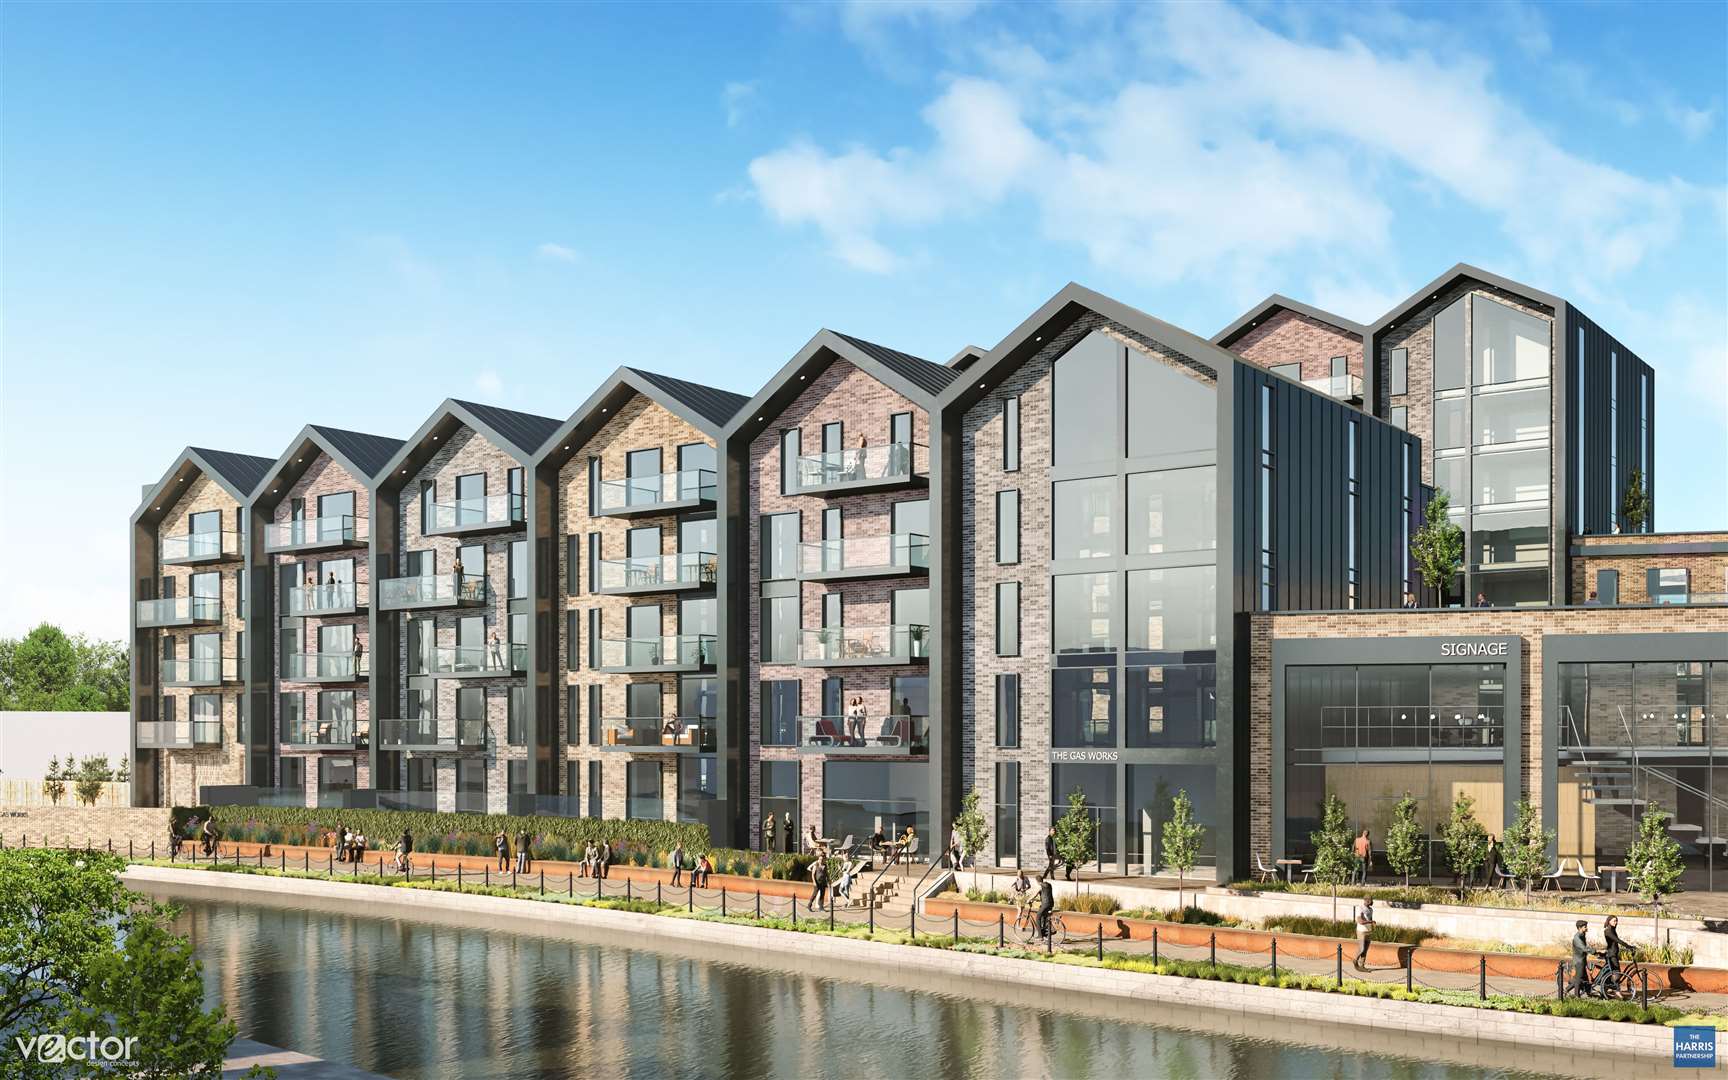 A CGI image of how the new Blueberry Homes apartment blocks will look. Image: Vector